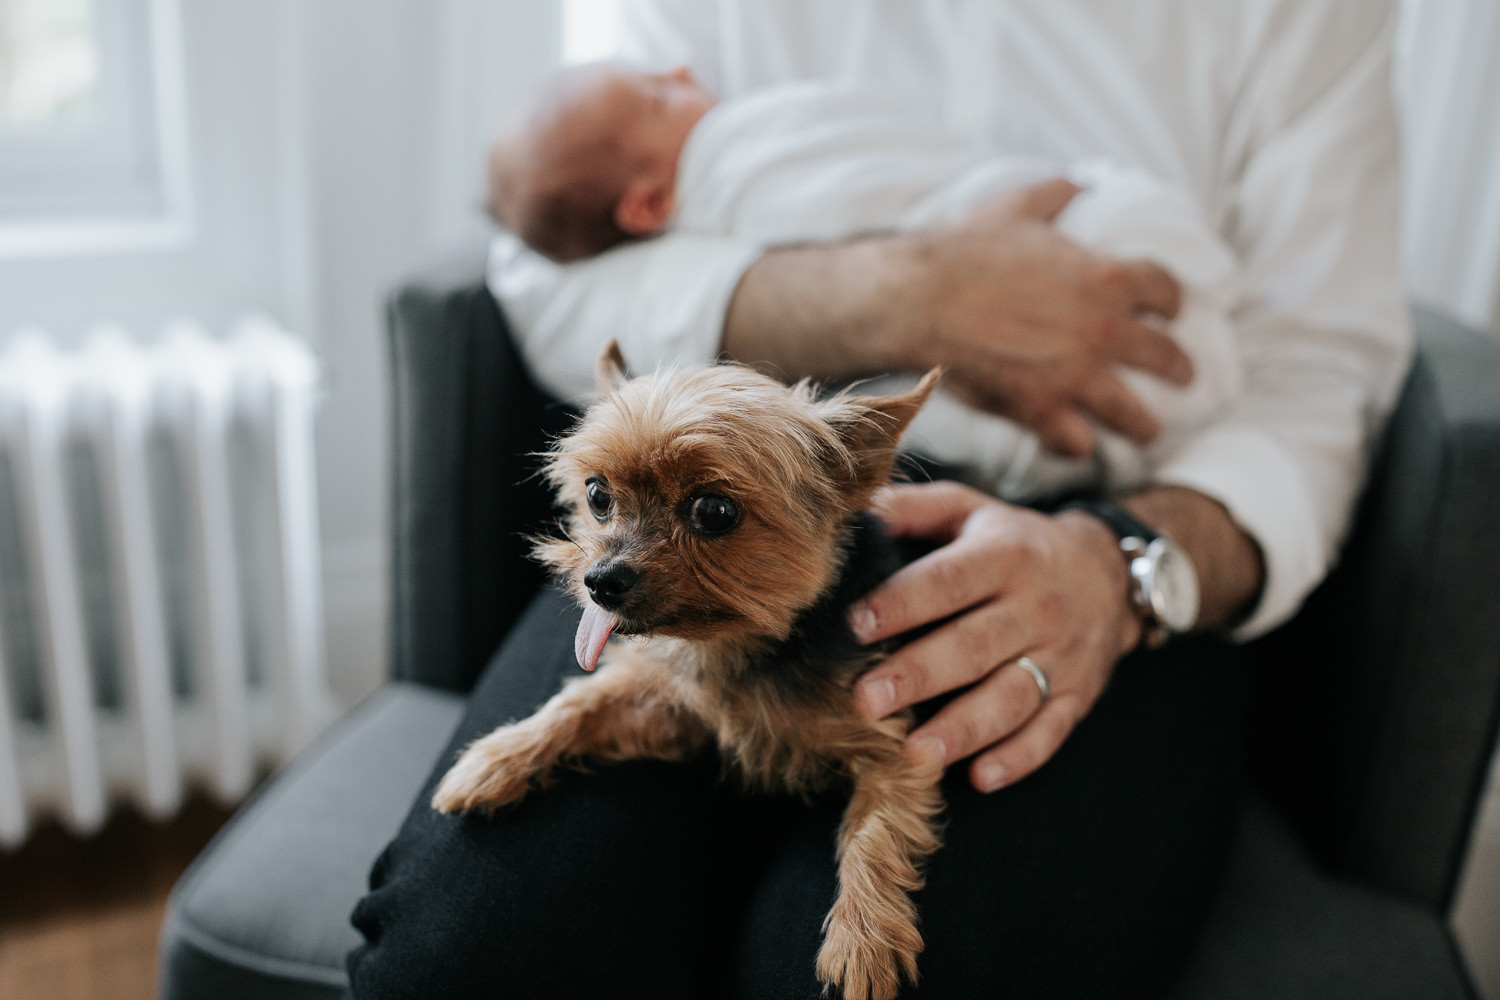 new father sitting in chair in living room, holding sleeping, swaddled 2 week old baby boy in his arms, teacup Yorkie with tongue out sitting in his lap - GTA Lifestyle Photography